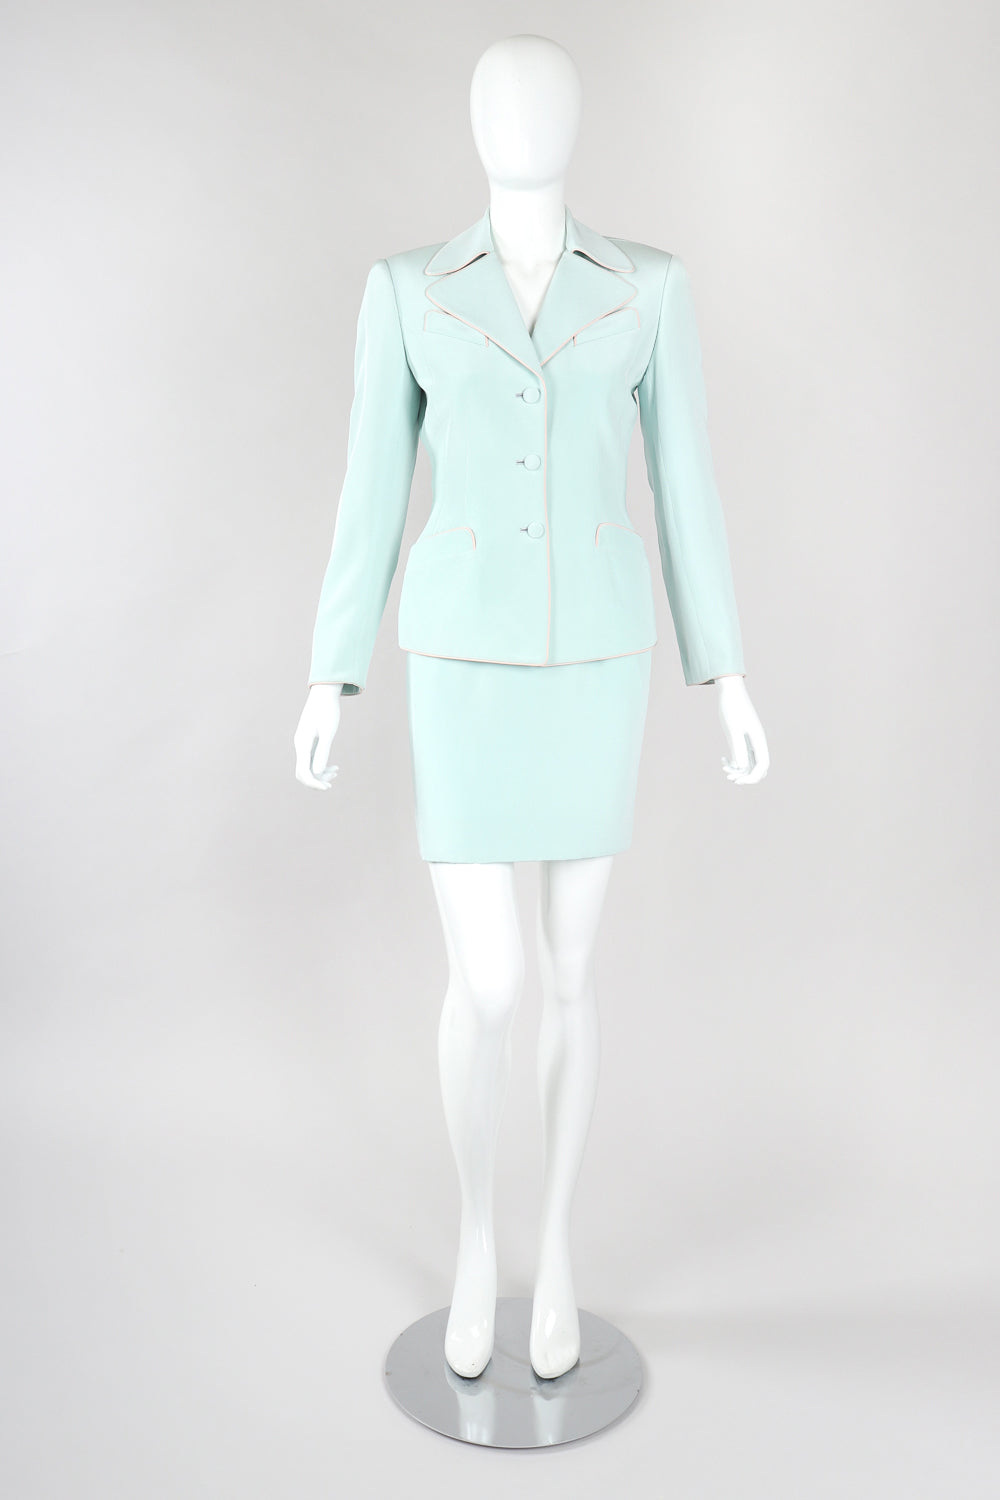 Recess Designer Consignment Vintage Richard Tyler Contrast Piped Silk Pajama Mint Jacket & Skirt Set Los Angeles Resale Recycled